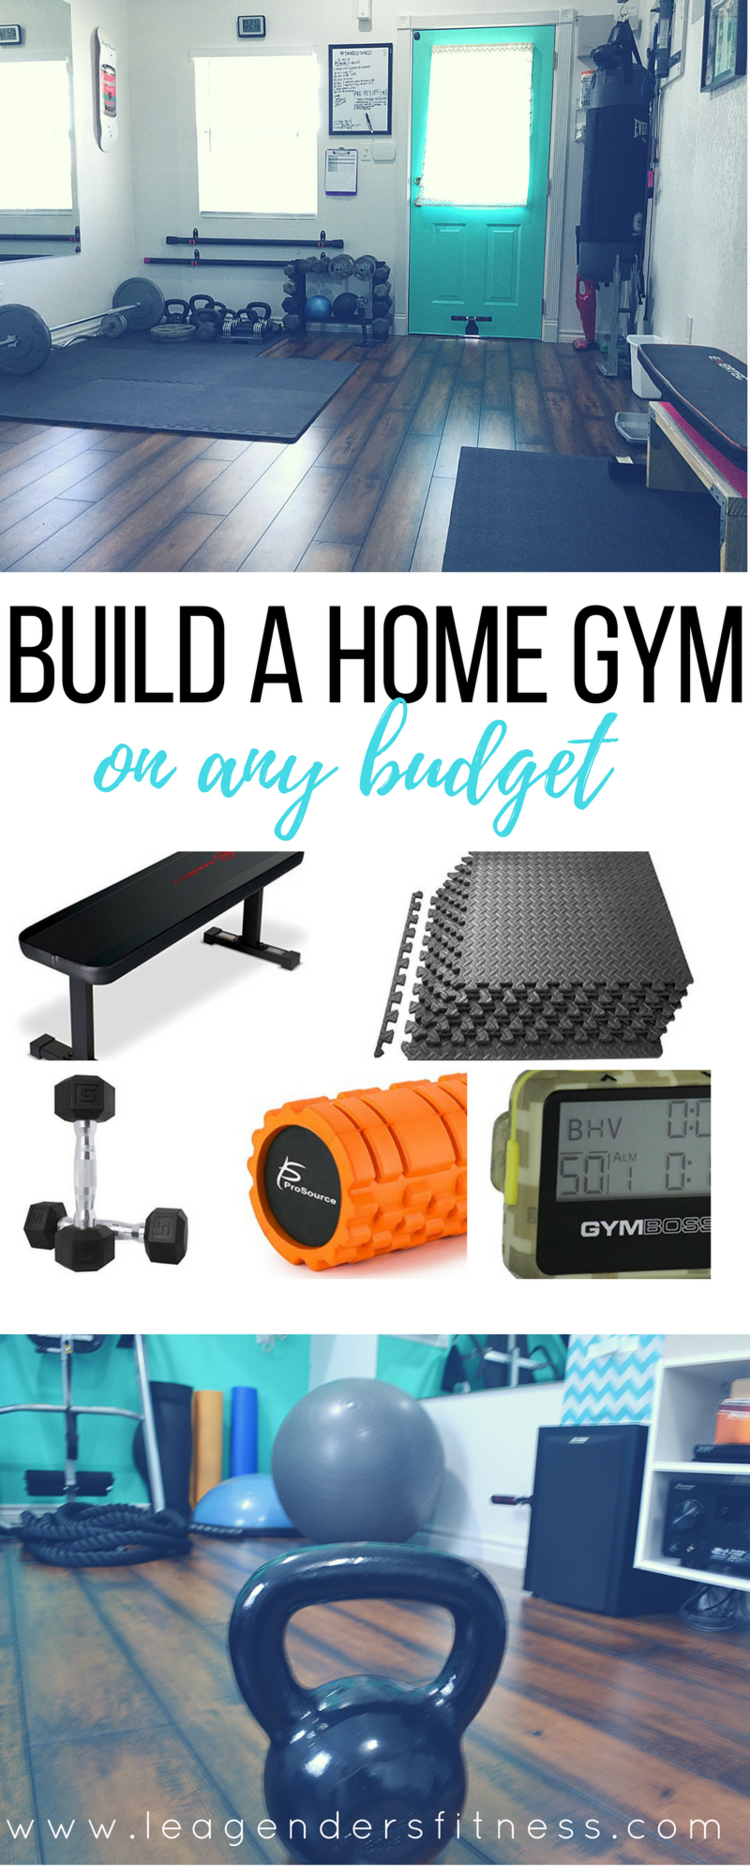 I workout at home in the #shredshed but it is not your typical home gym. We  went all-out and built our ideal gym environment in a